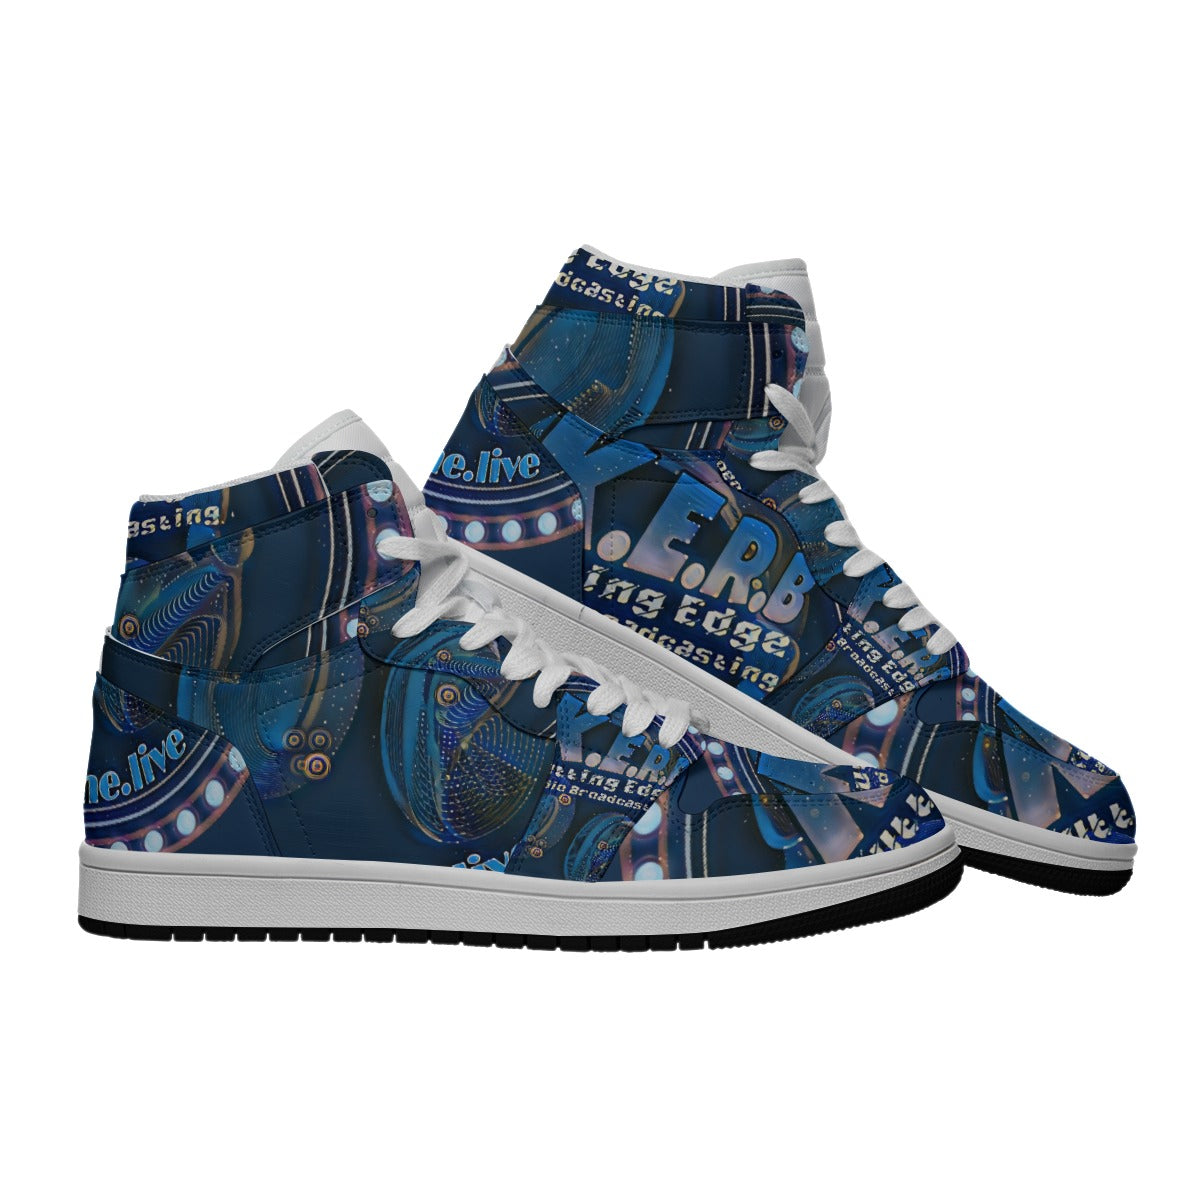 Galaxy KERB Logo Men's Leather High-Top Sneakers